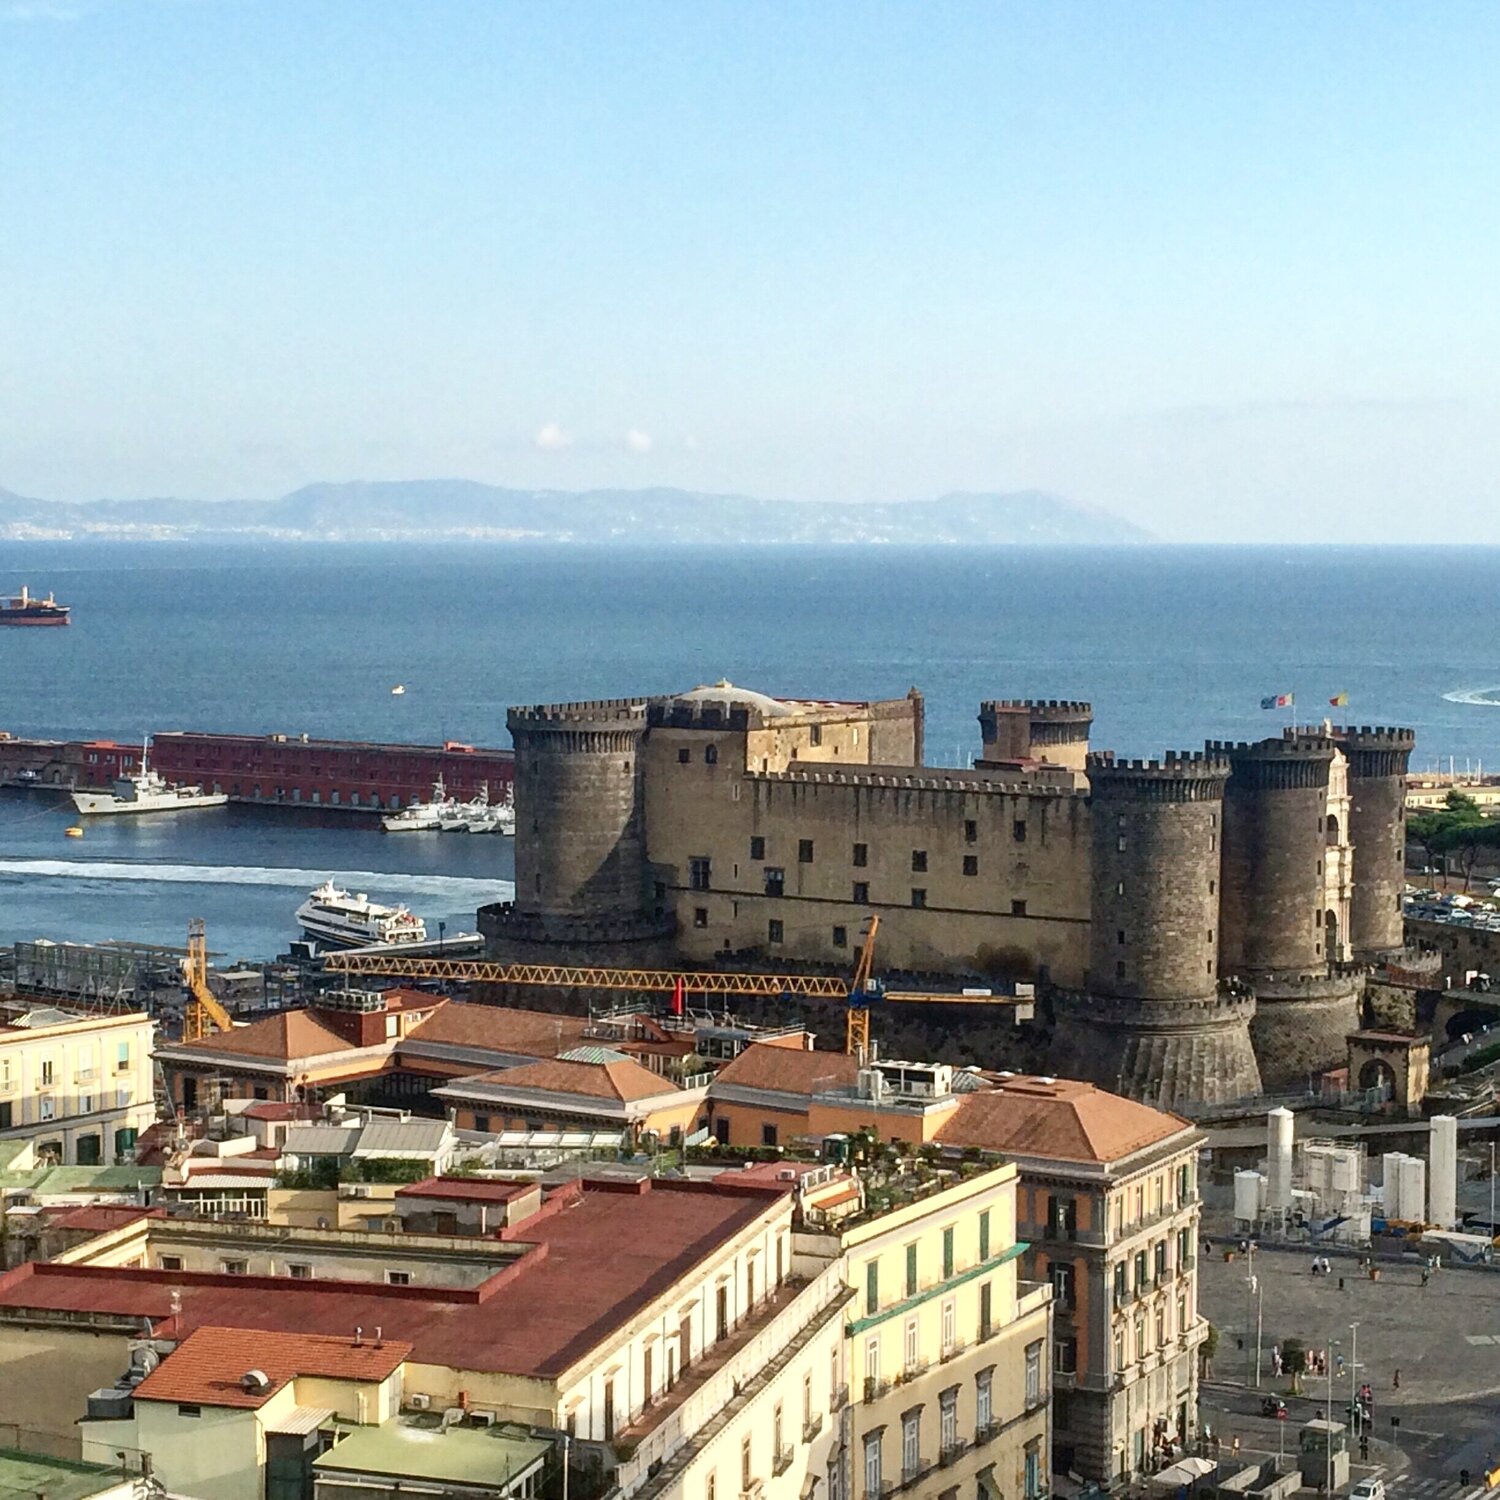 When should I go to Naples? Naples weather, holidays and sales